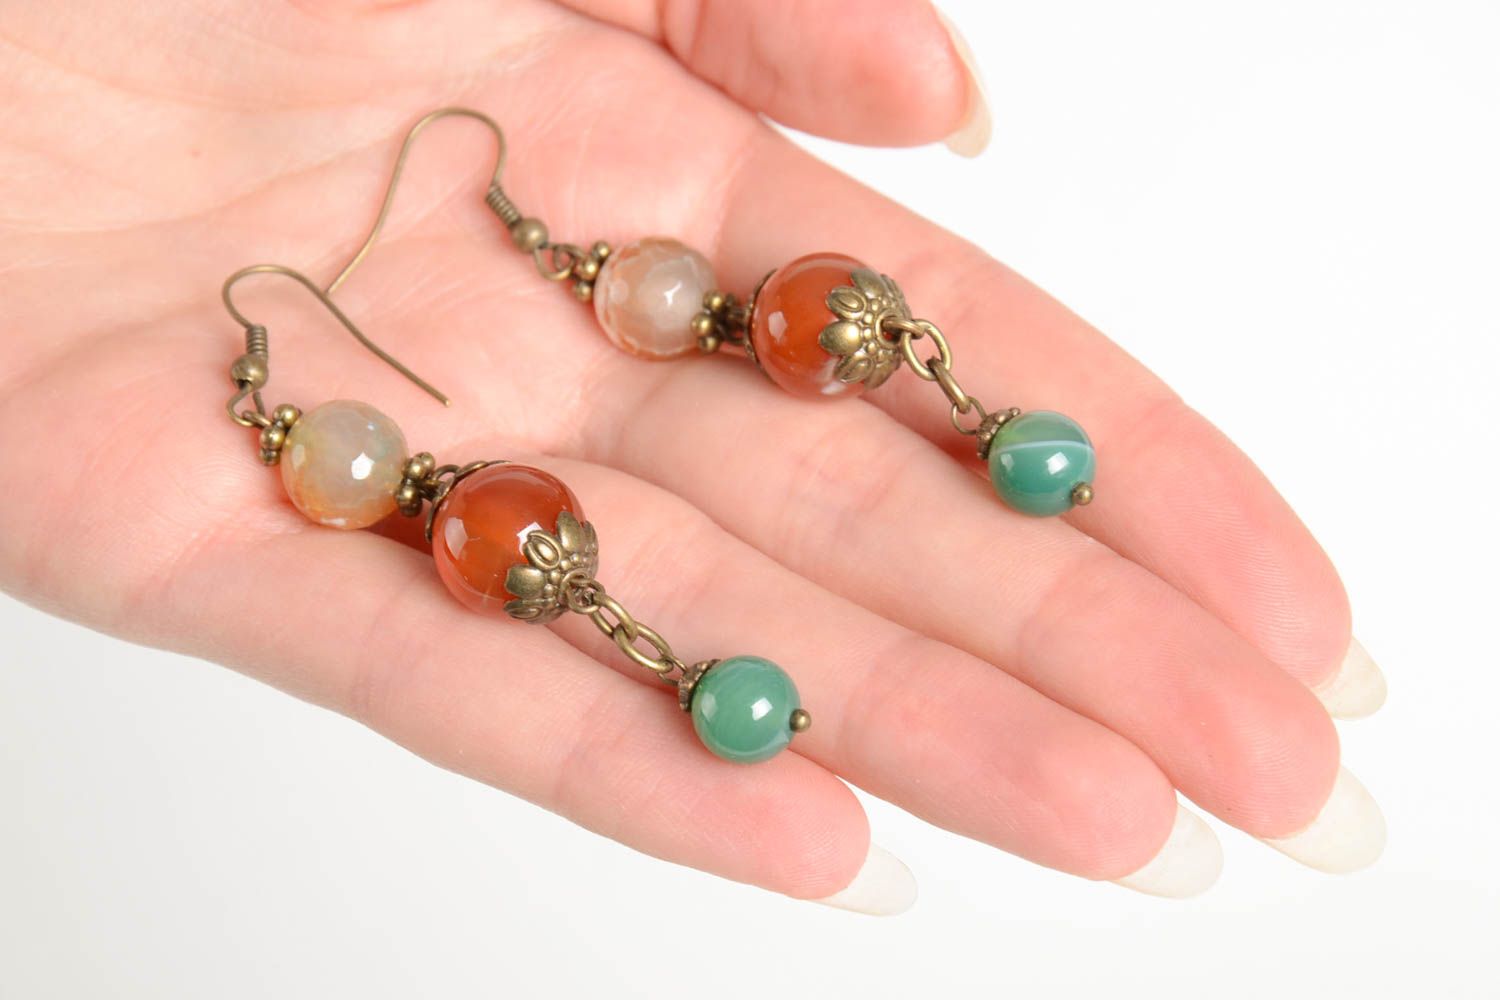 Handmade charming earrings natural stone jewelry trendy earrings with charms photo 3